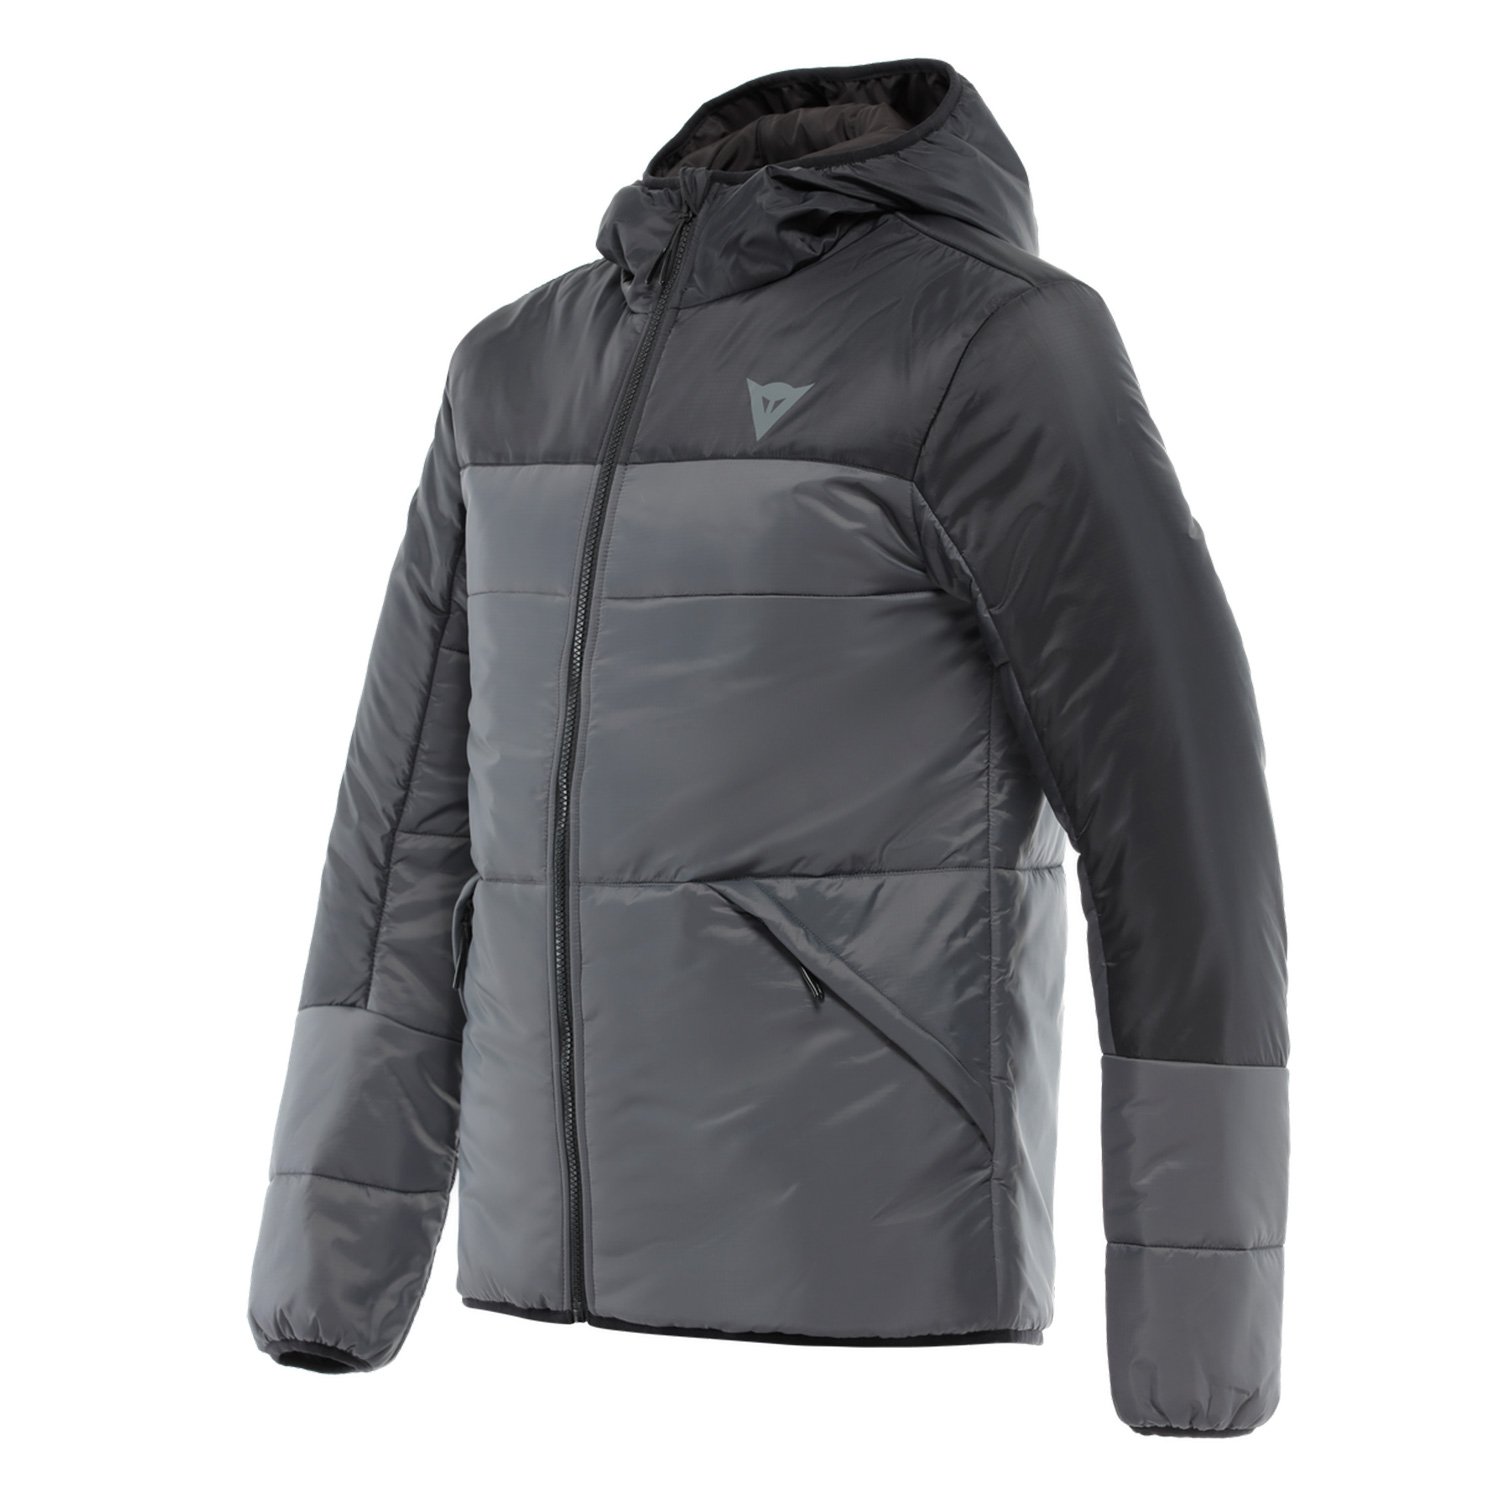 Image of Dainese After Ride Insulated Jacket Anthracite Size L ID 8051019657565